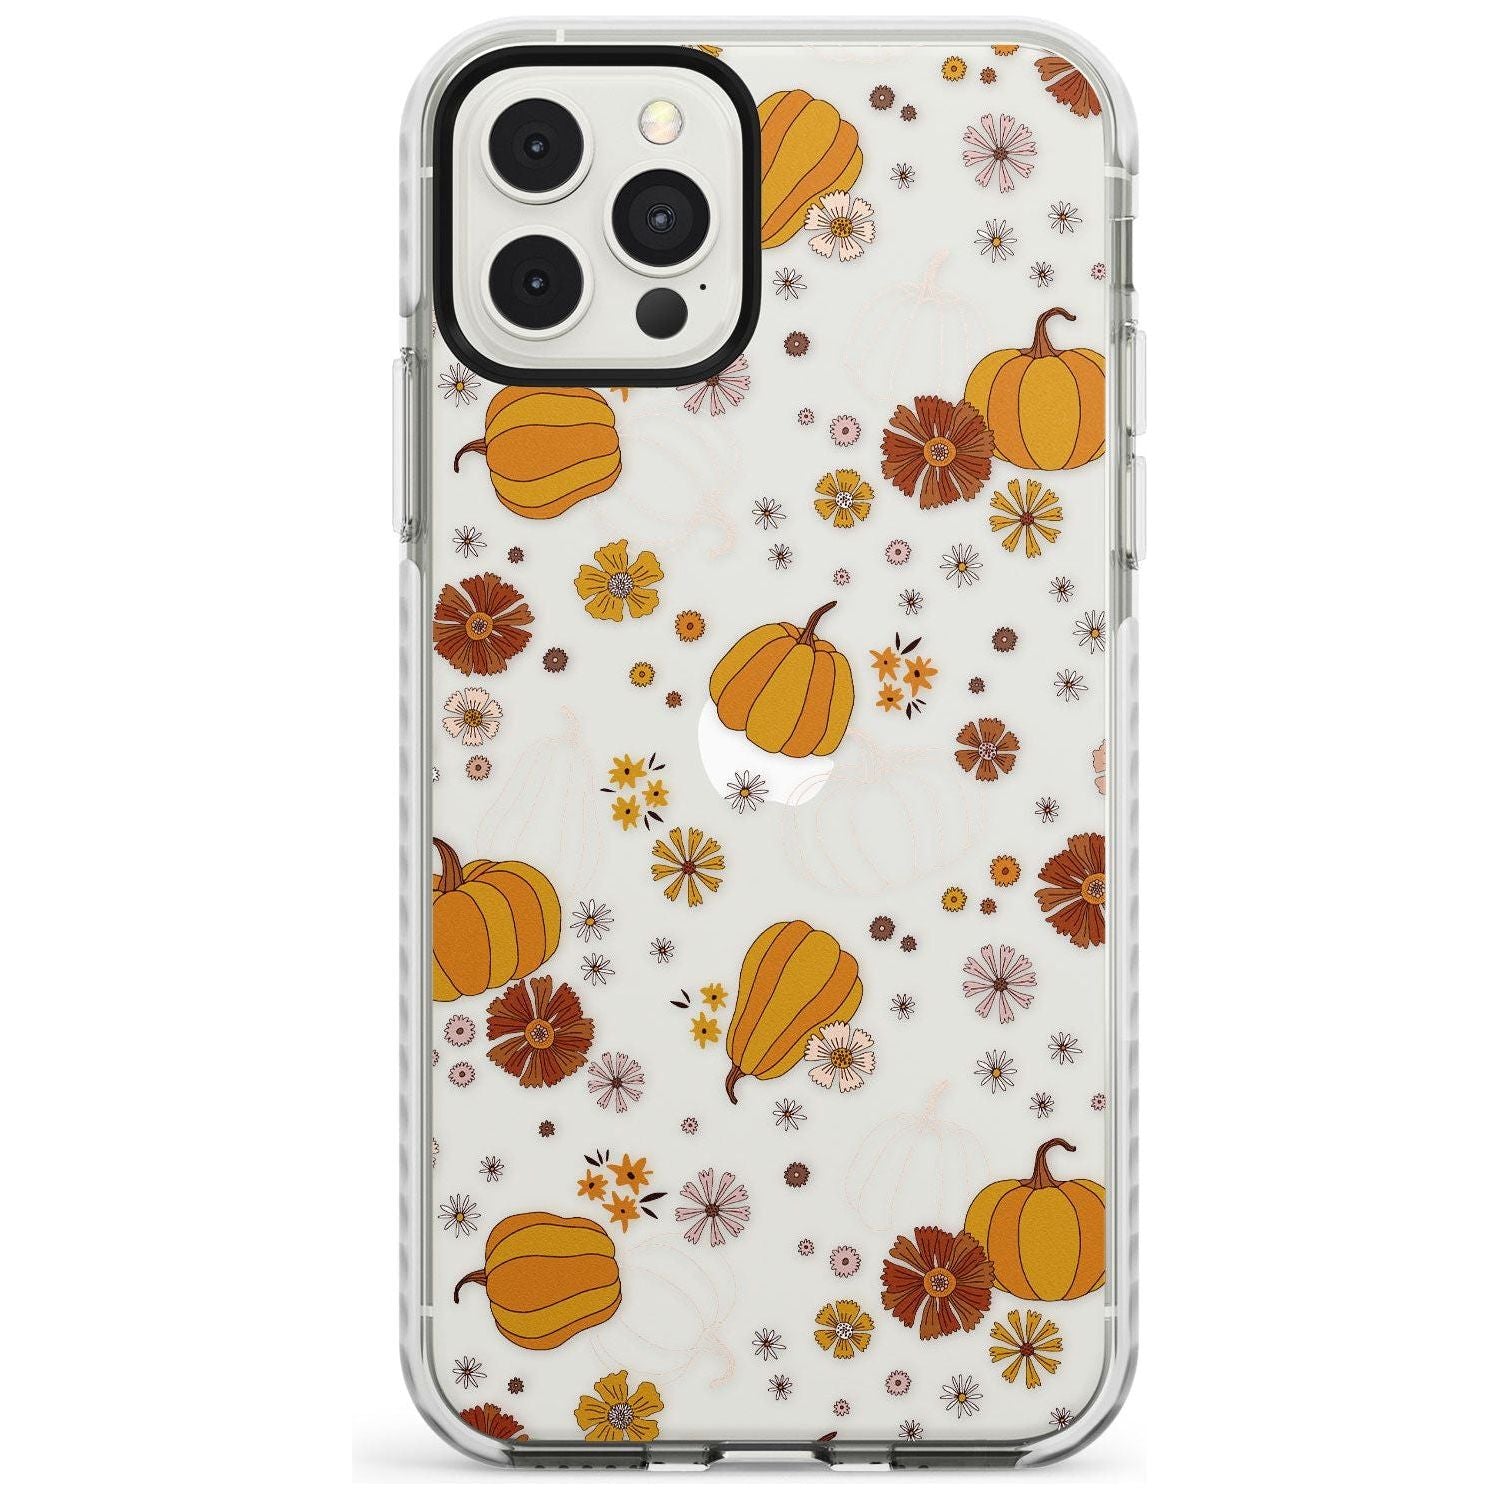 Halloween Skulls and Flowers Impact Phone Case for iPhone 11, iphone 12